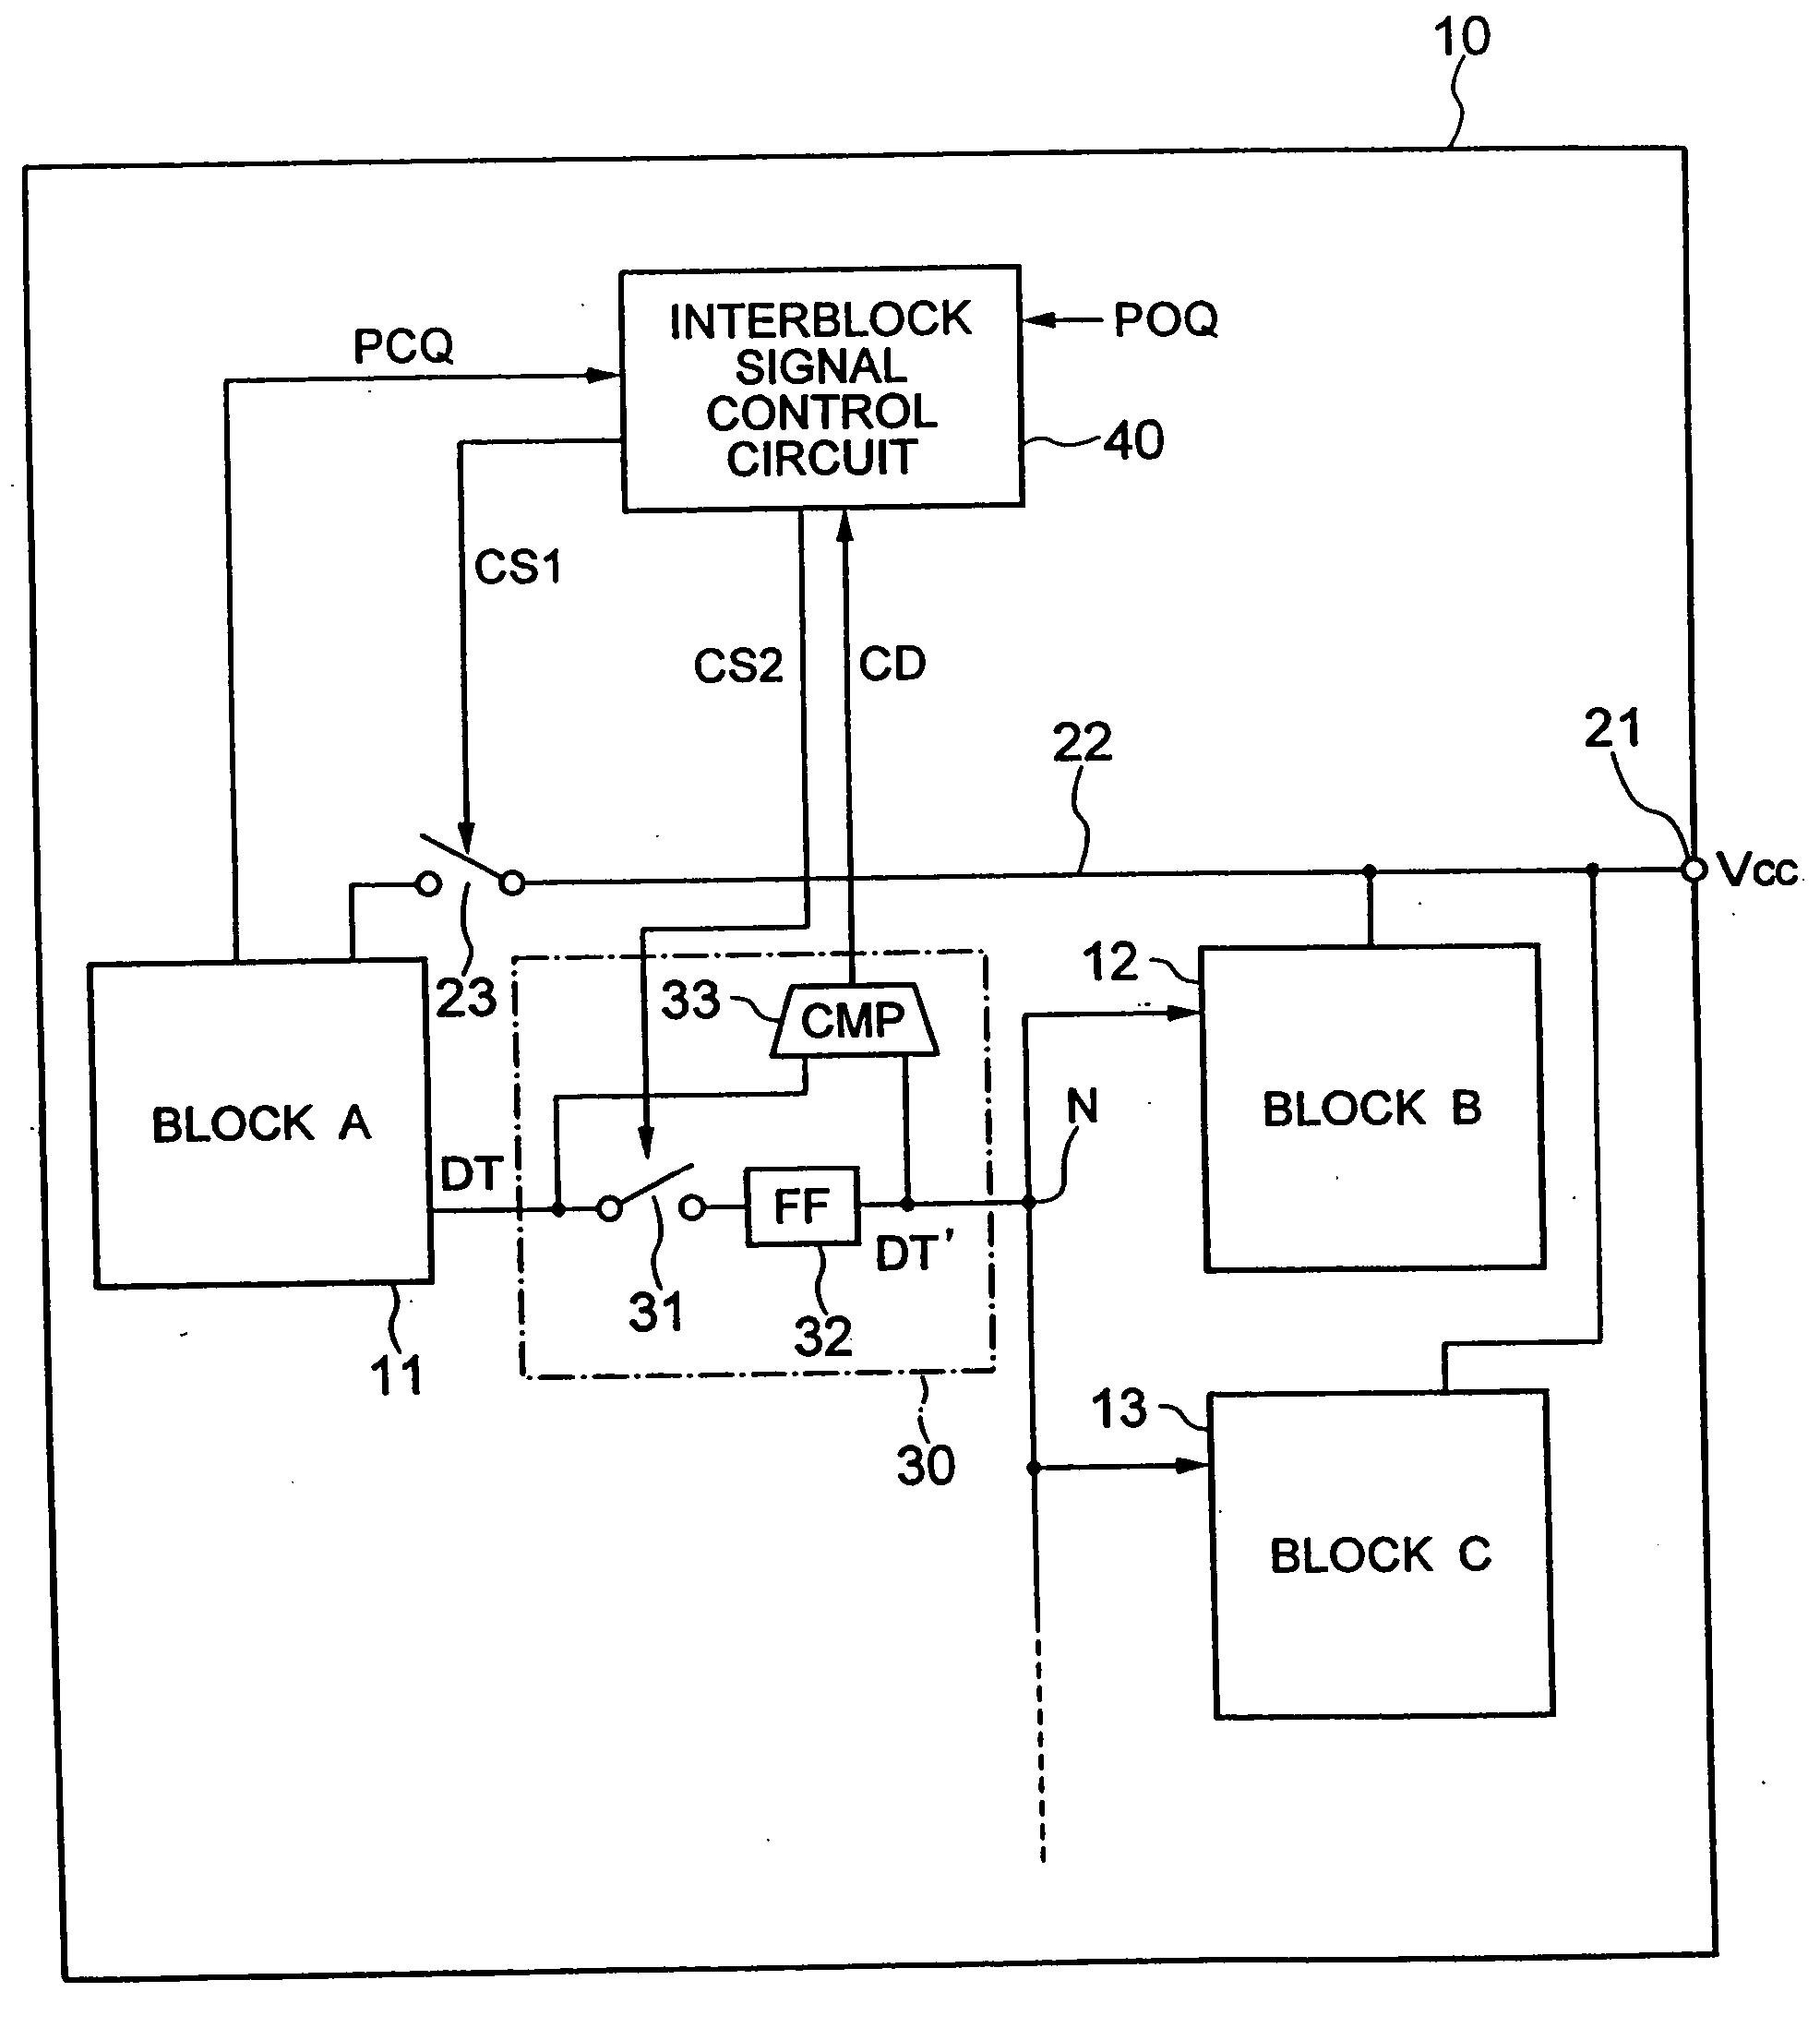 Multiple circuit blocks with interblock control and power conservation